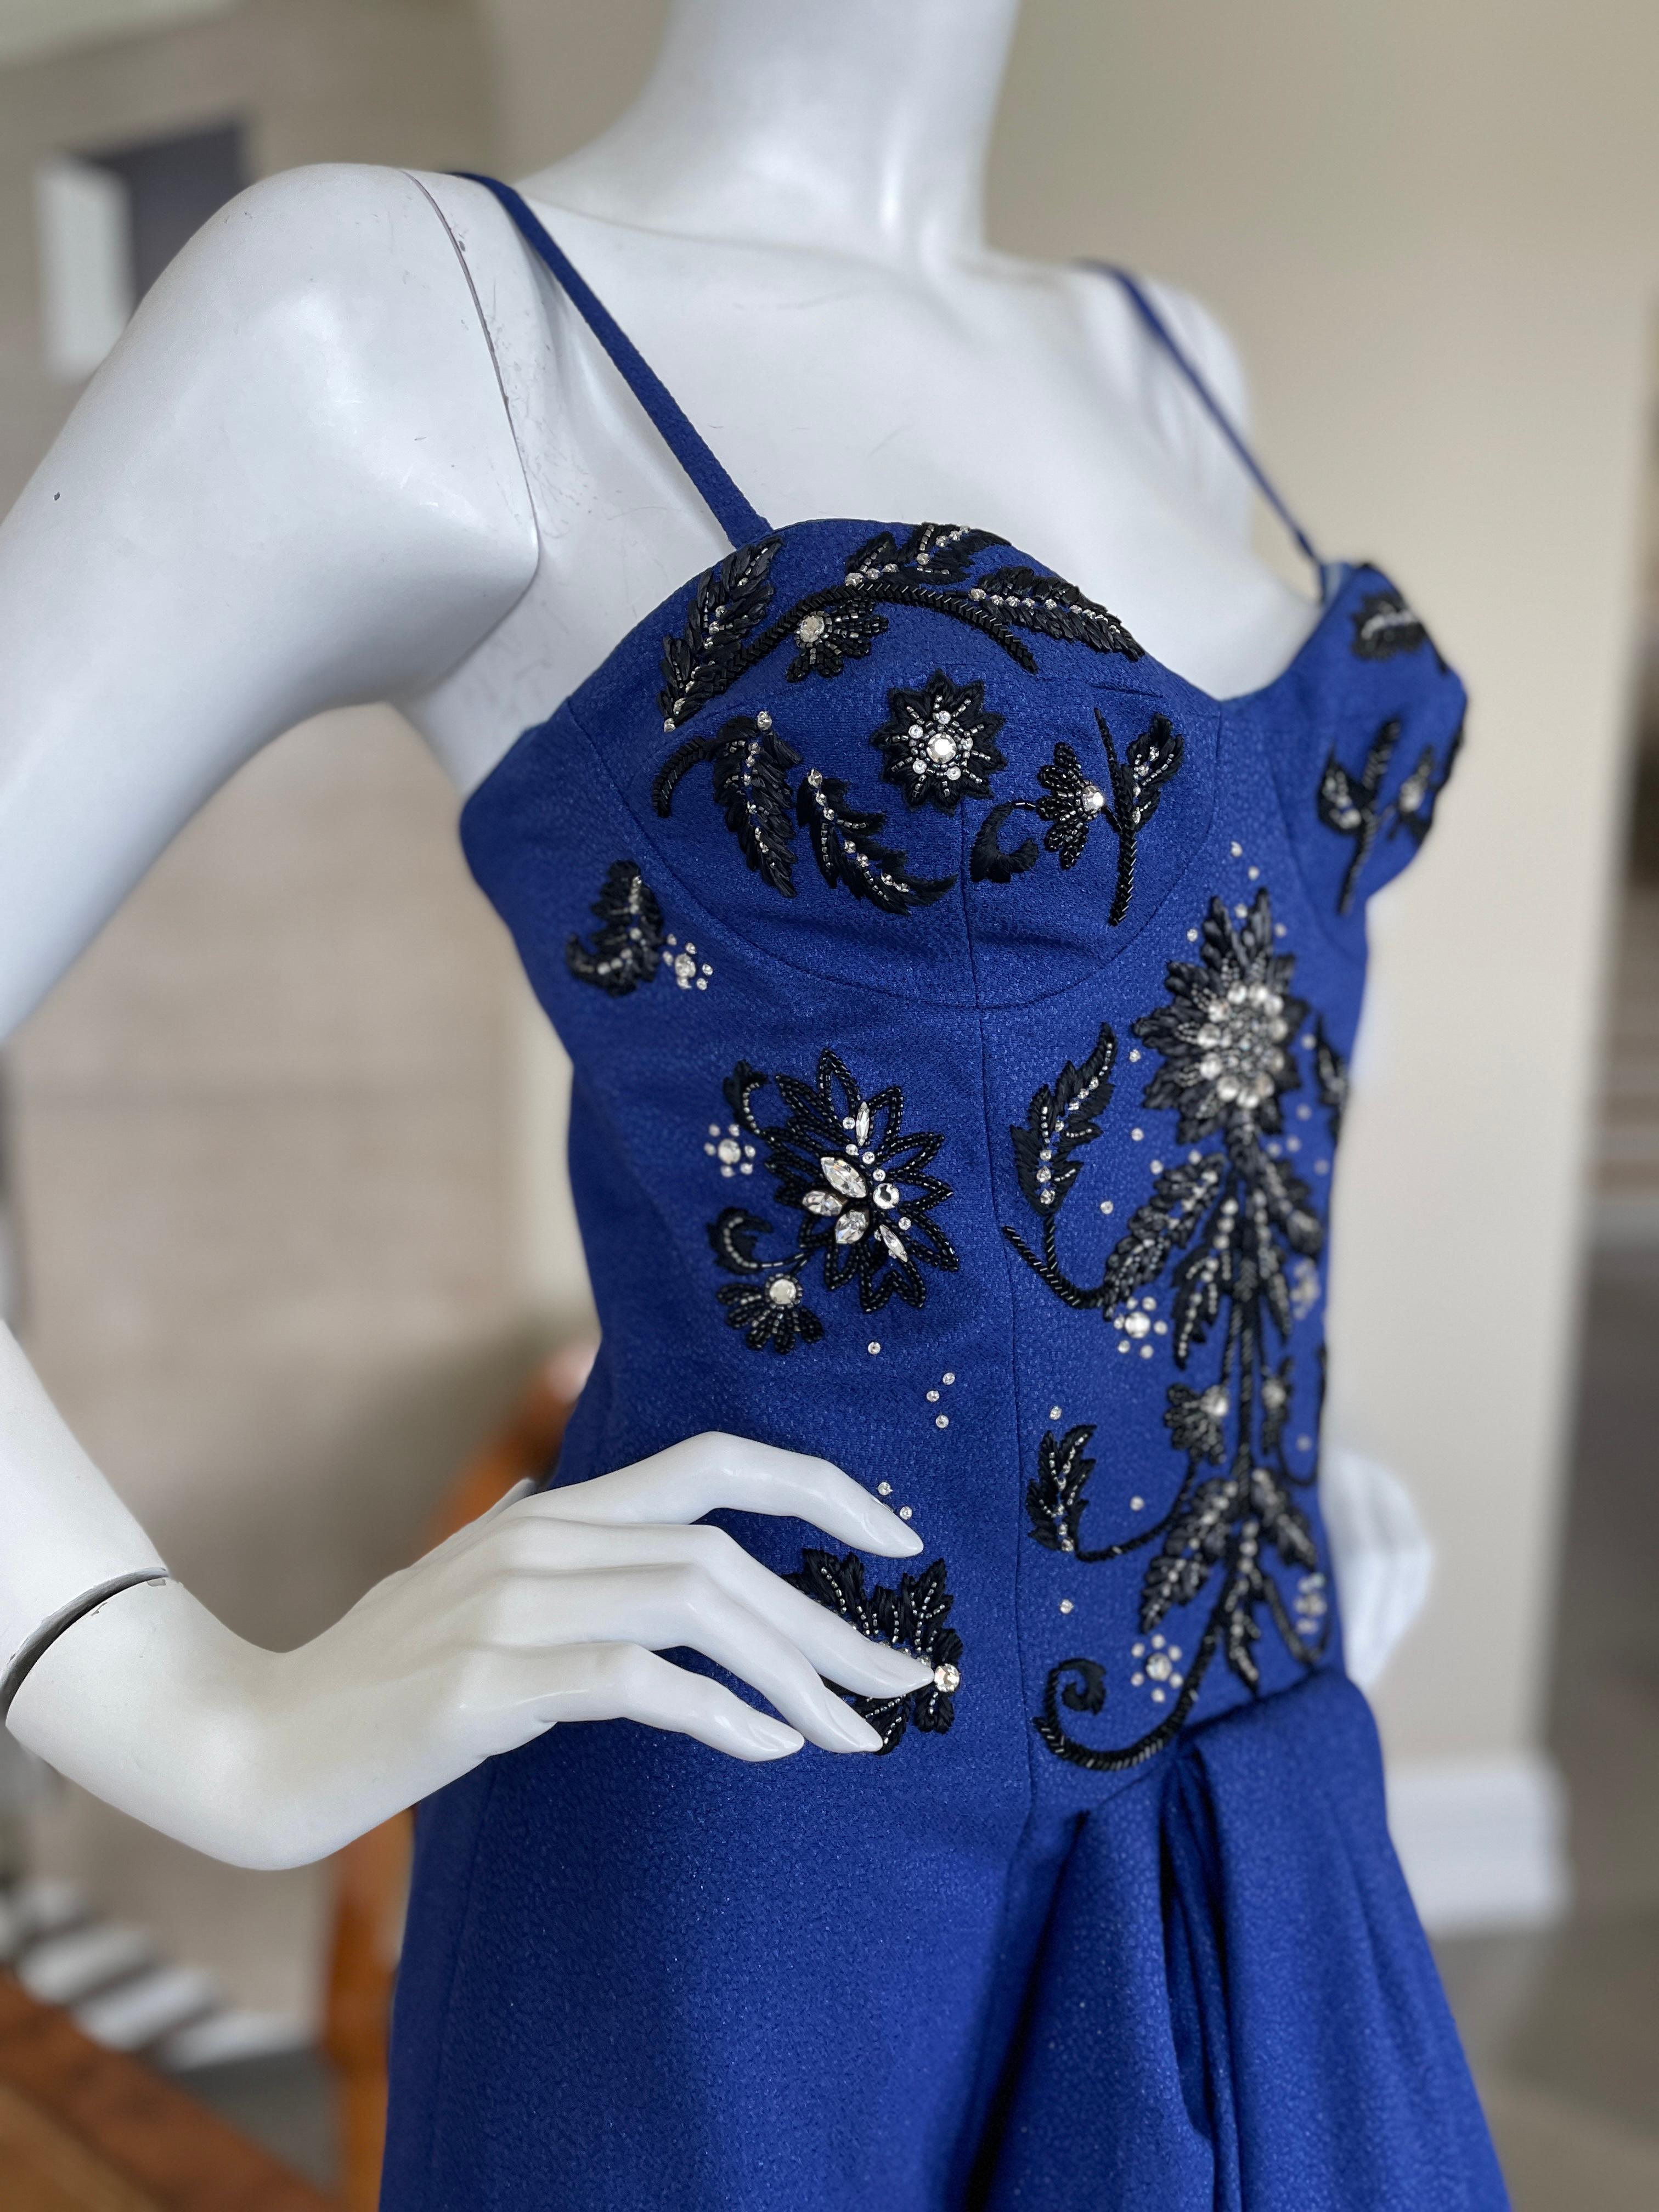 Christian Dior by John Galliano Fall 2007 Blue Dress with Crystal Details For Sale 5